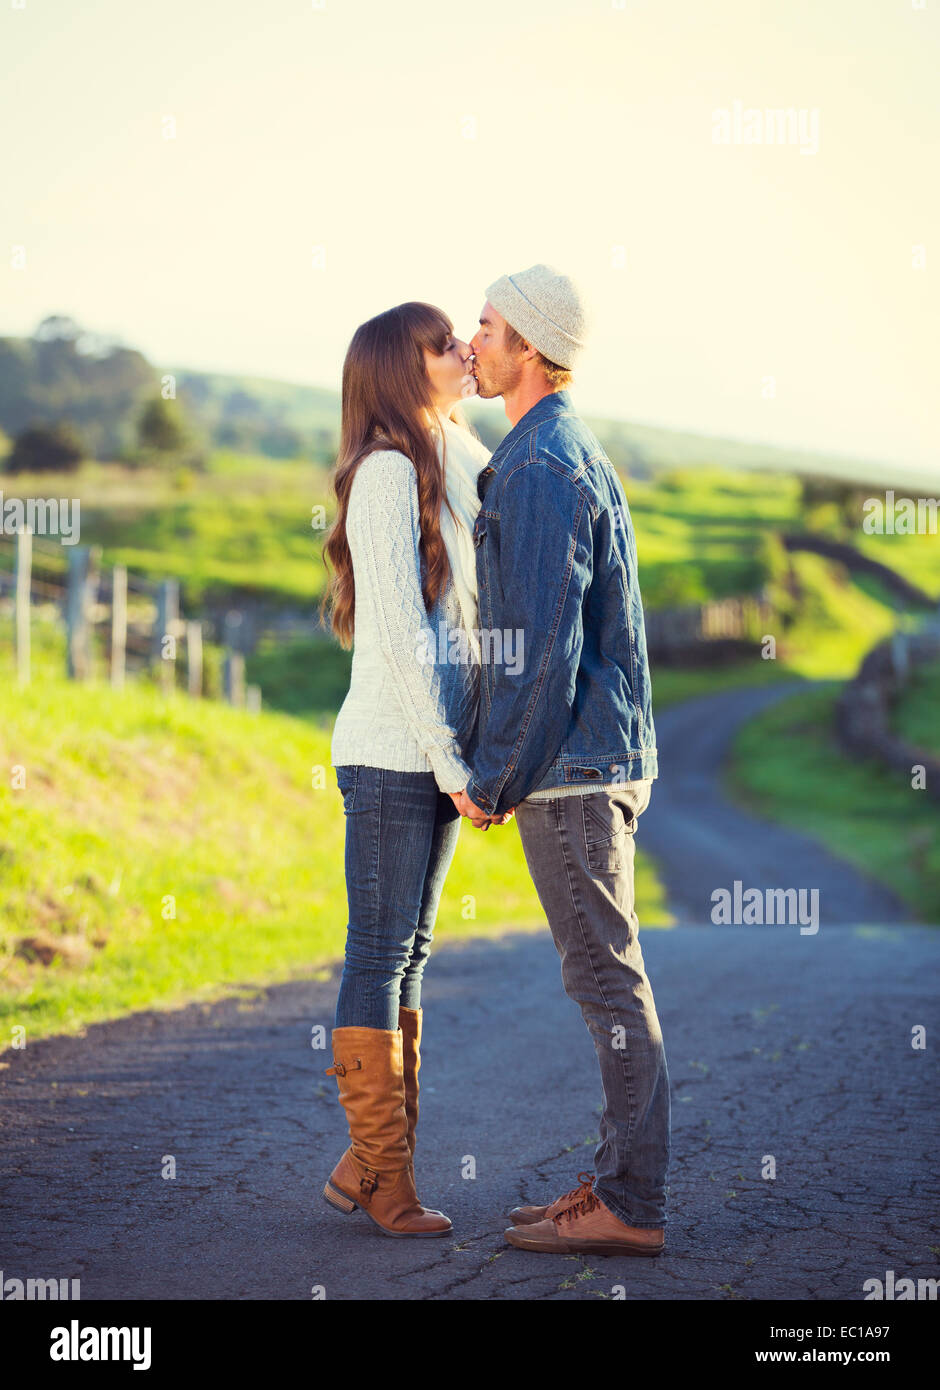 Romantic Young Couple in Love Outdoors on Country Road Stock Photo